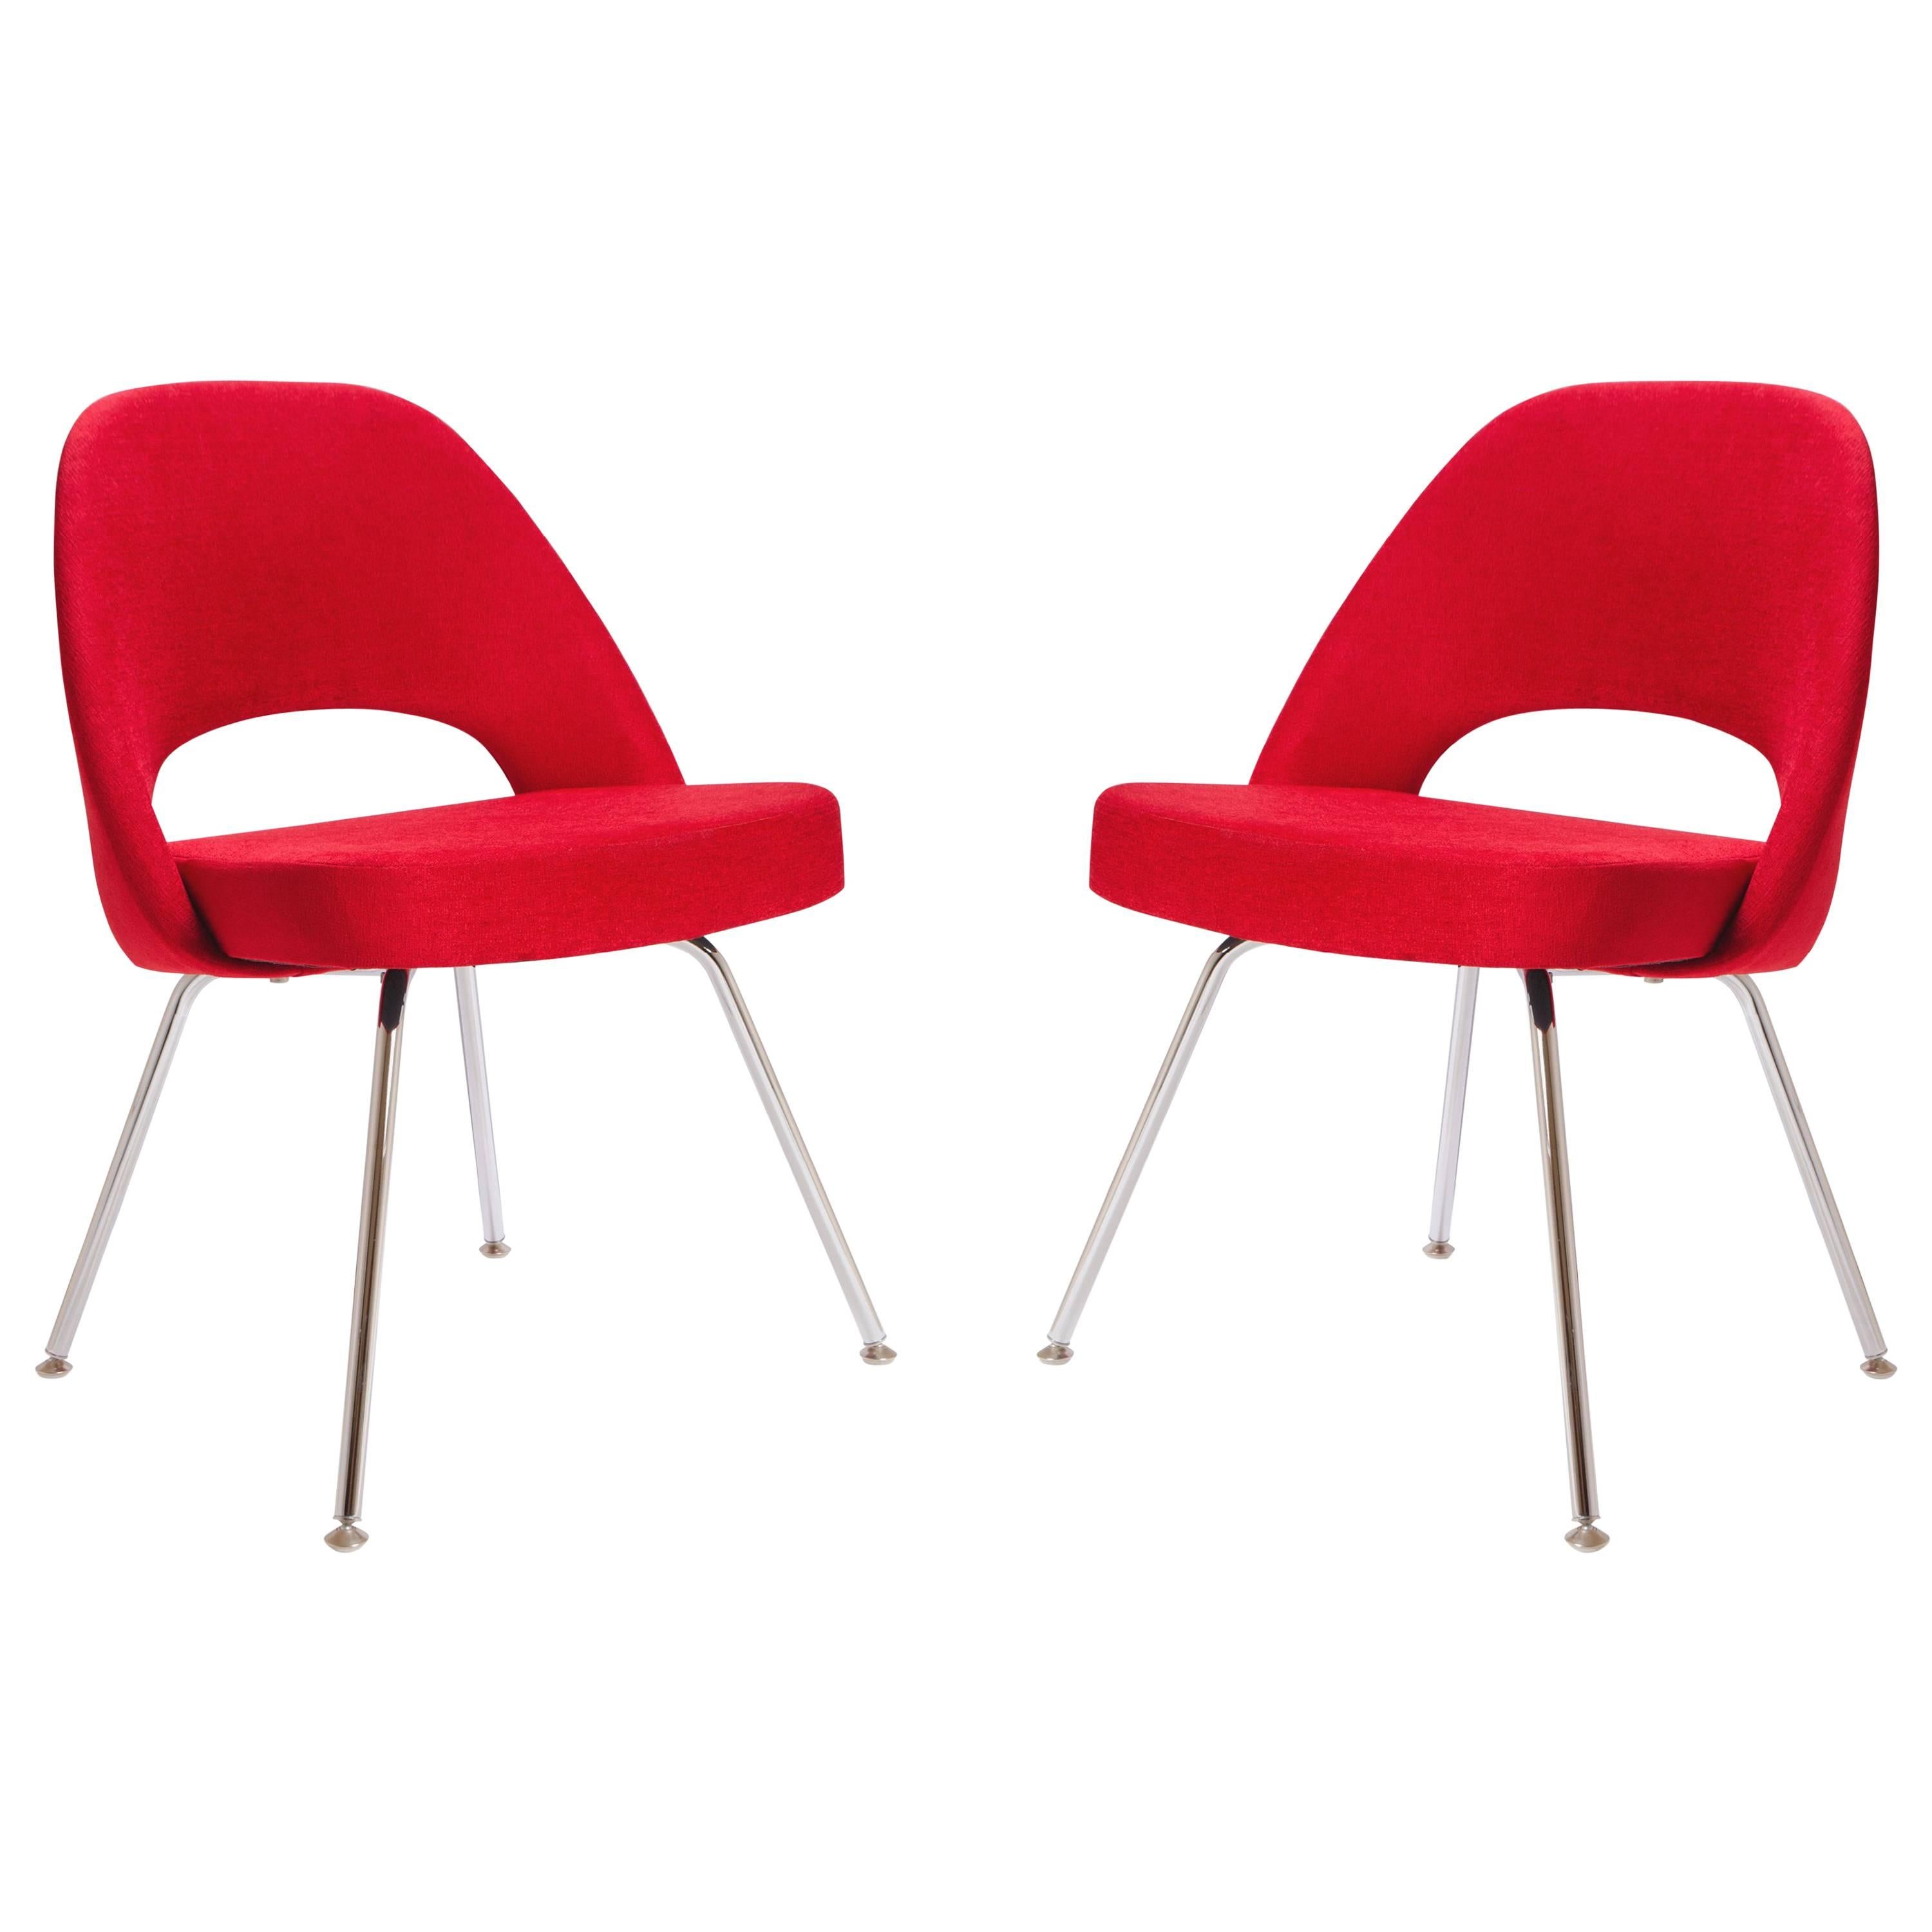 Saarinen for Knoll Executive Armless Chairs in Original Knoll Fire-Red, Pair